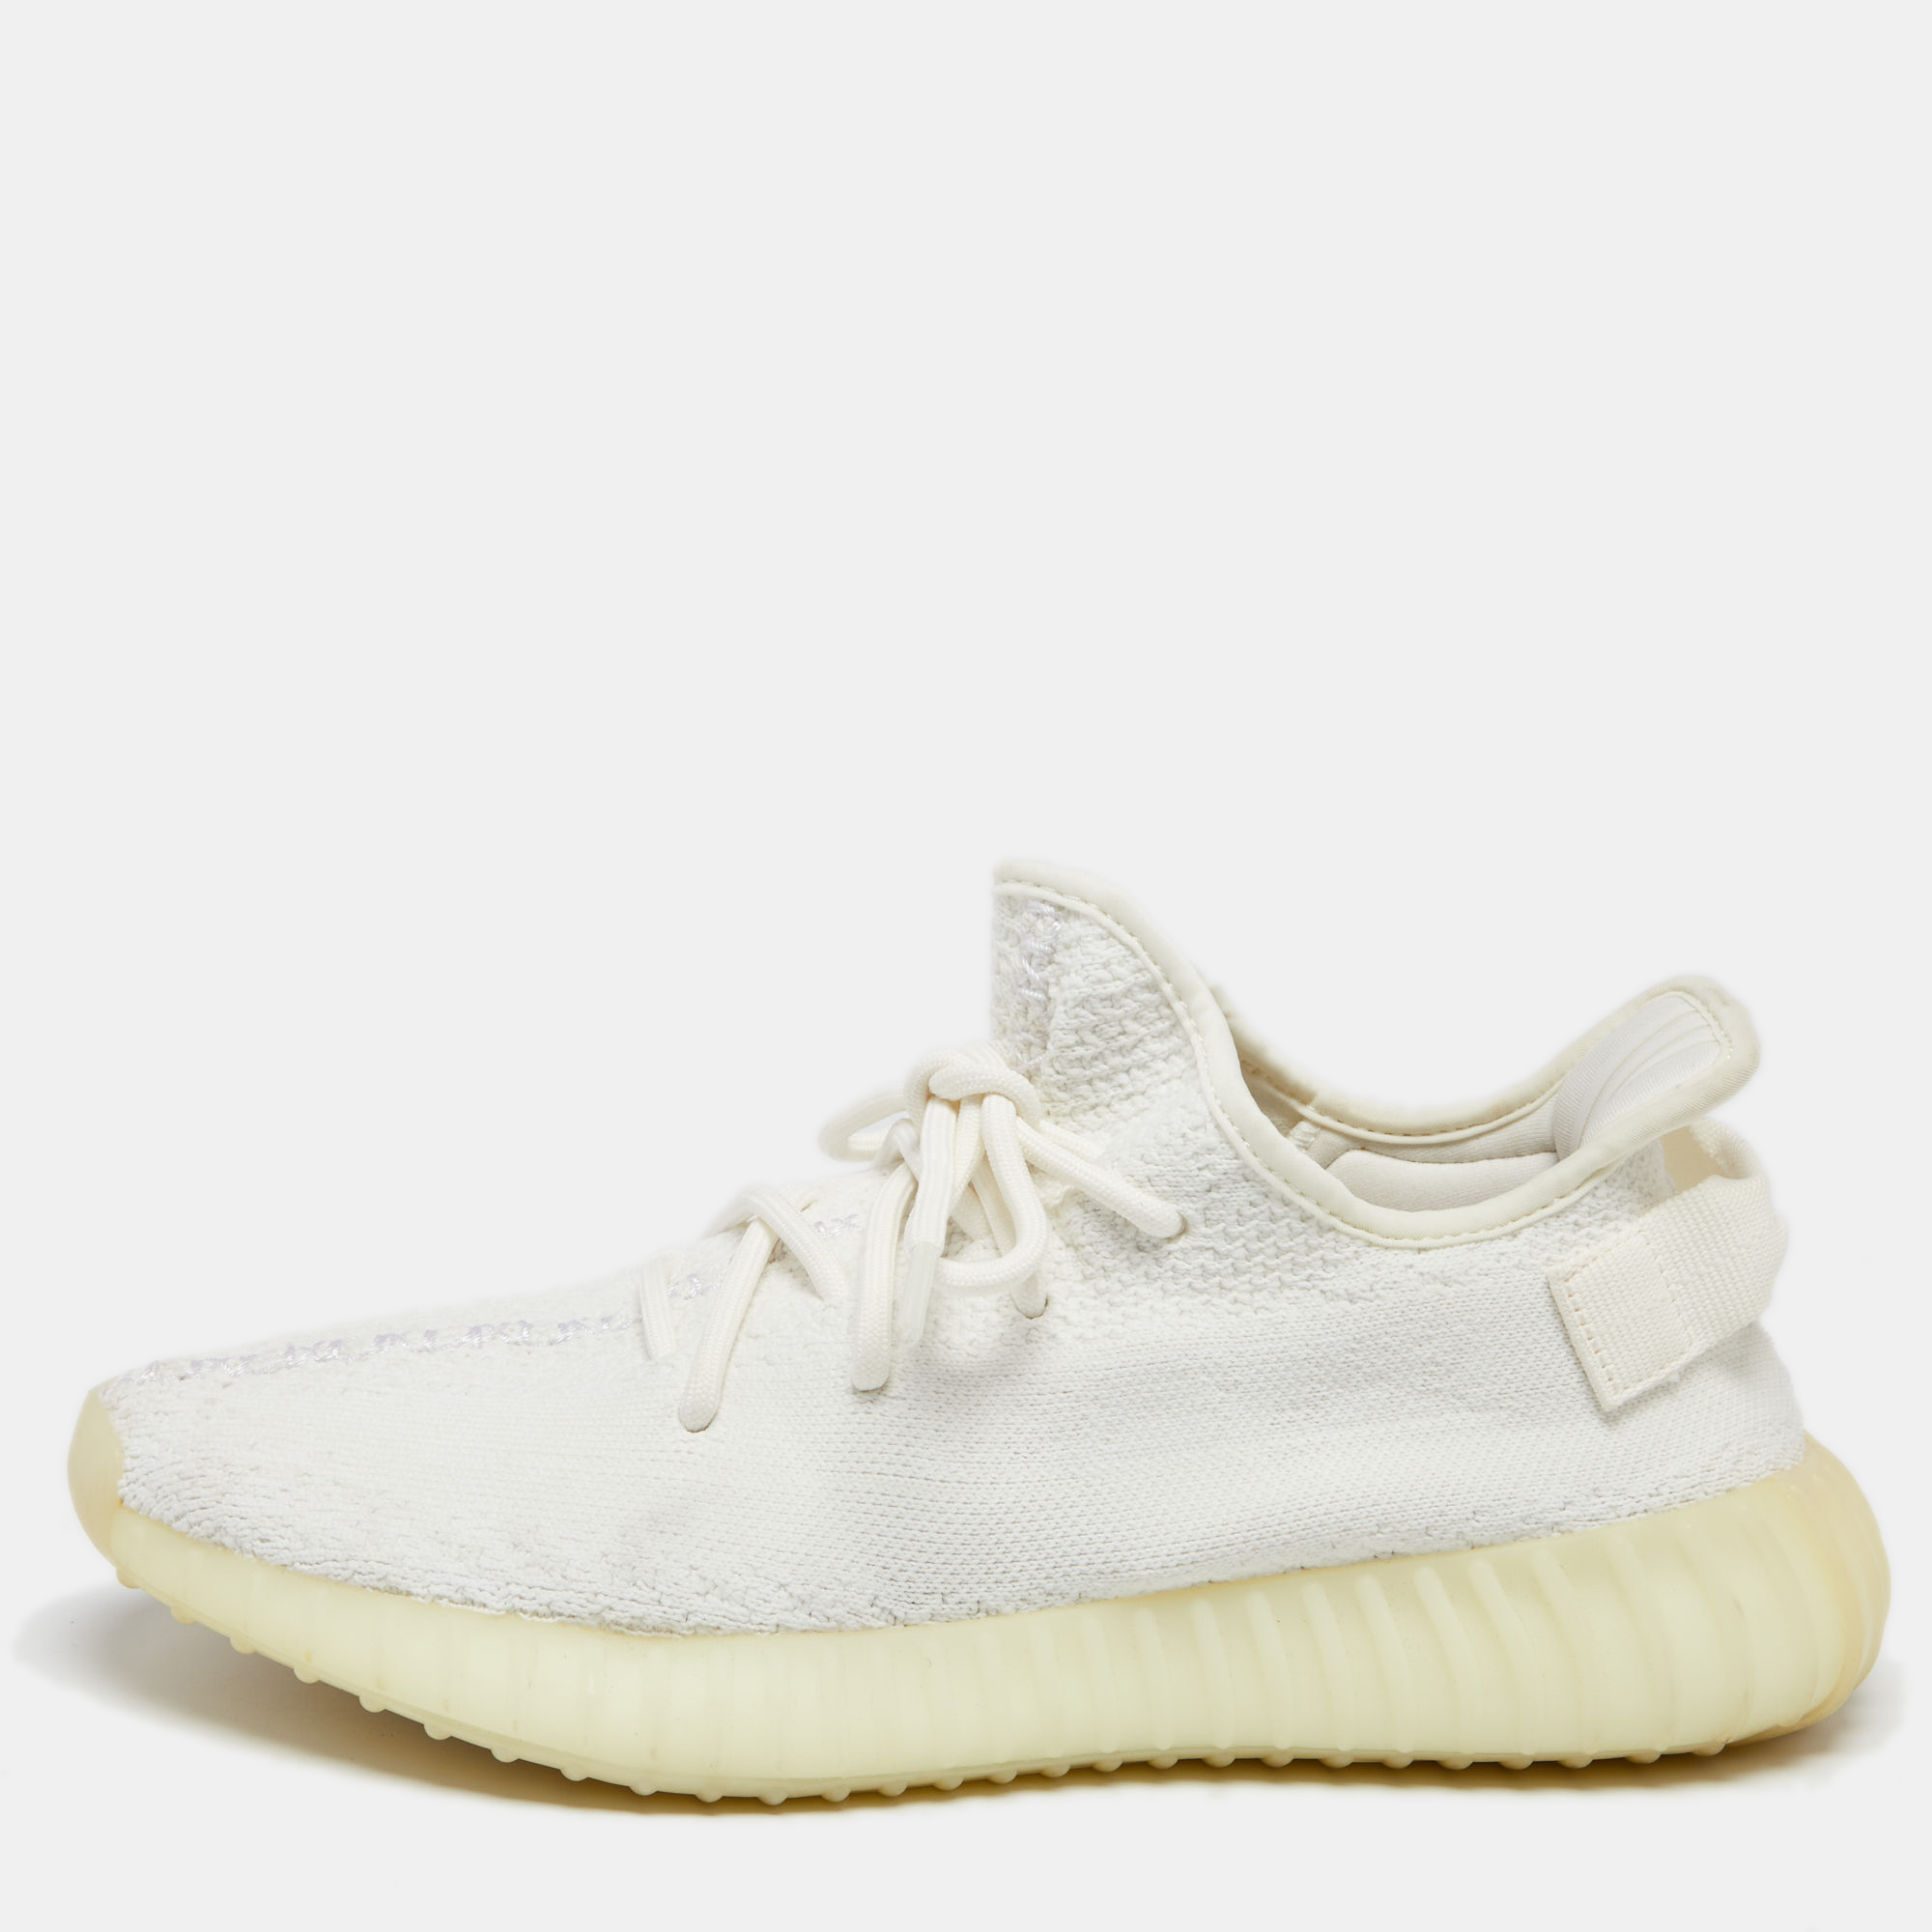 

Yeezy x Adidas White Knit Fabric Boost 350 V2 Triple White Sneakers Size